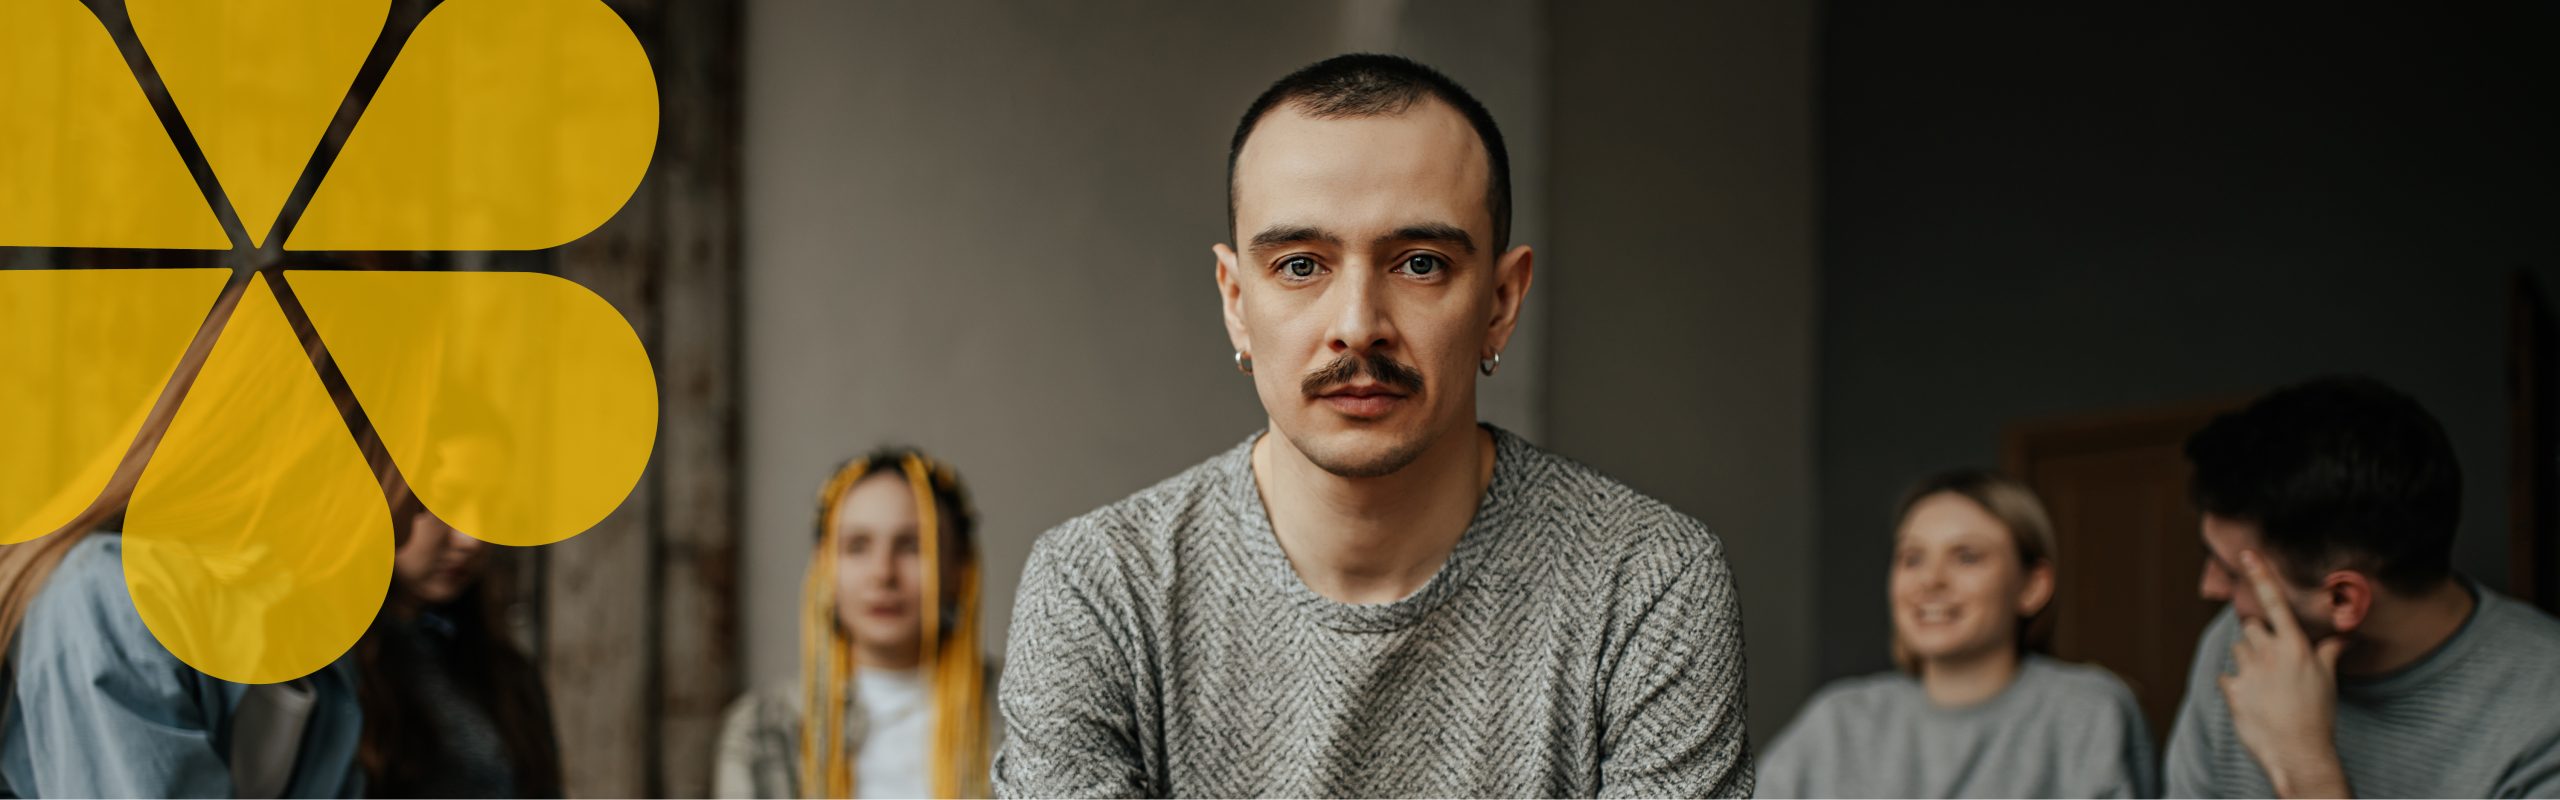 person with a moustache looking seriously at the camera and looking worried like they need some help. People sitting in the background.